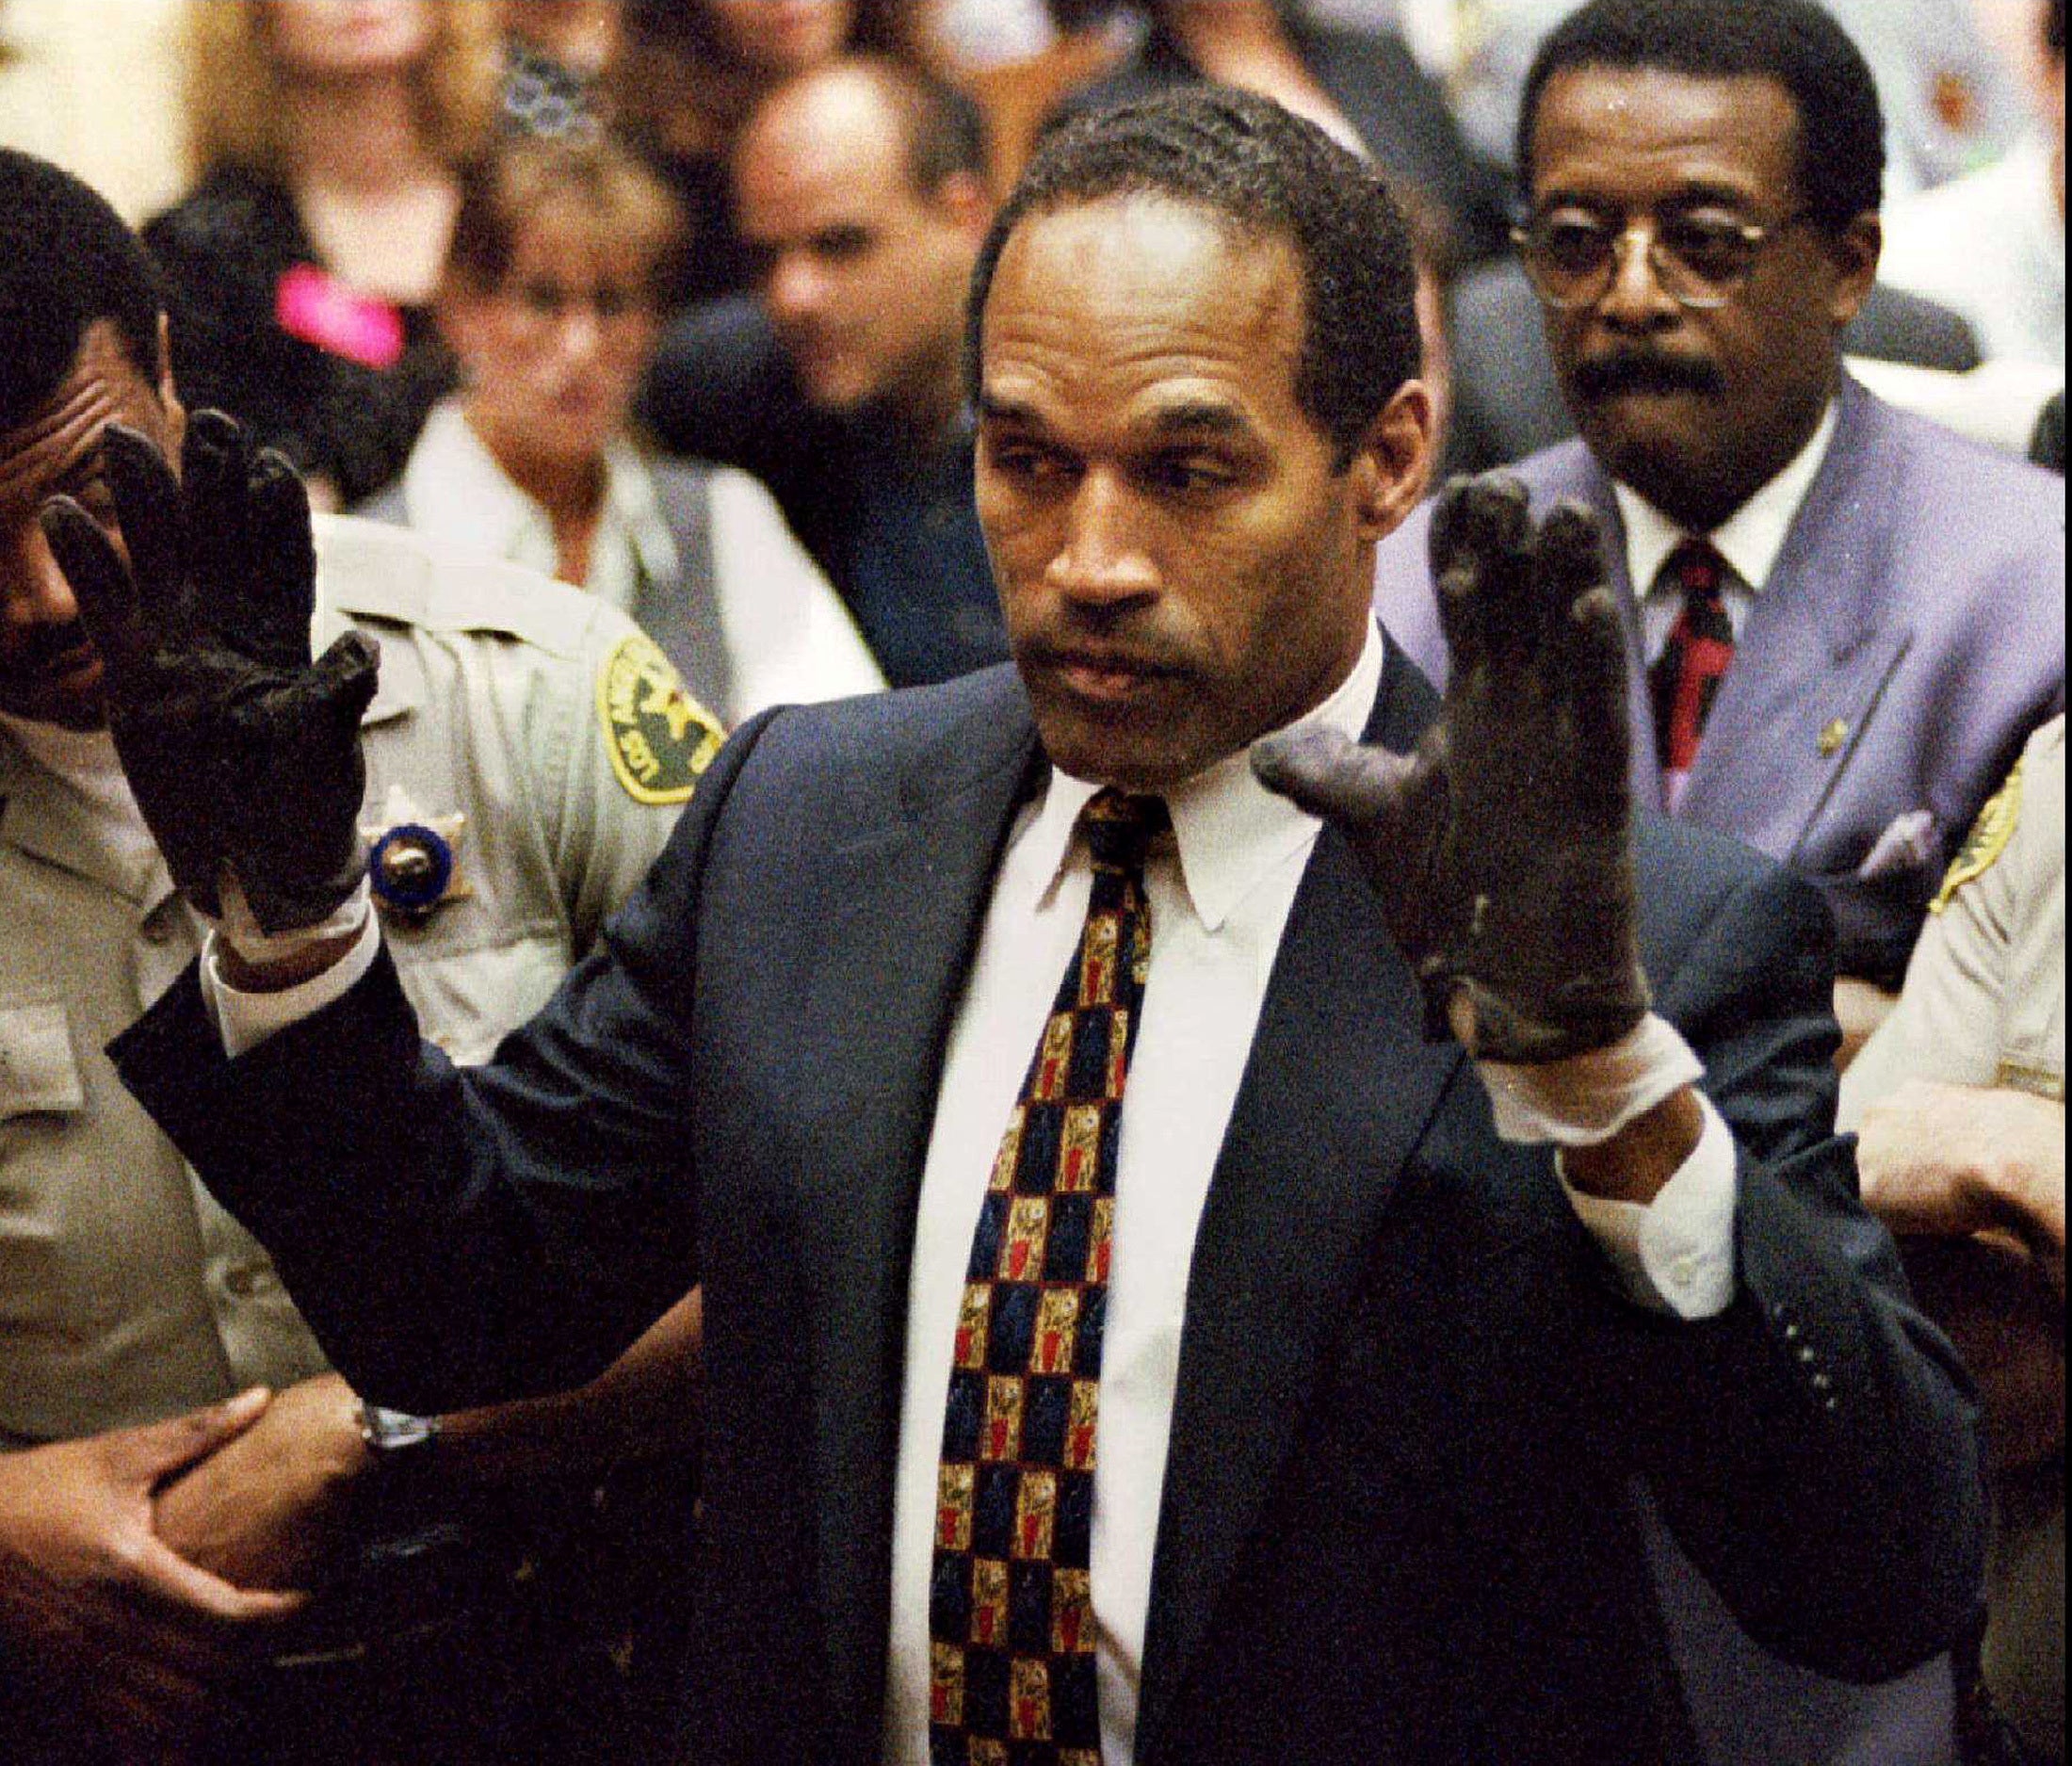 O.J. Simpson, wearing the blood stained gloves found by Los Angeles Police and entered into evidence in Simpson's murder trial, displays his hands to the jury at the request of prosecutor Christopher Darden in this file photograph from June 15, 1995